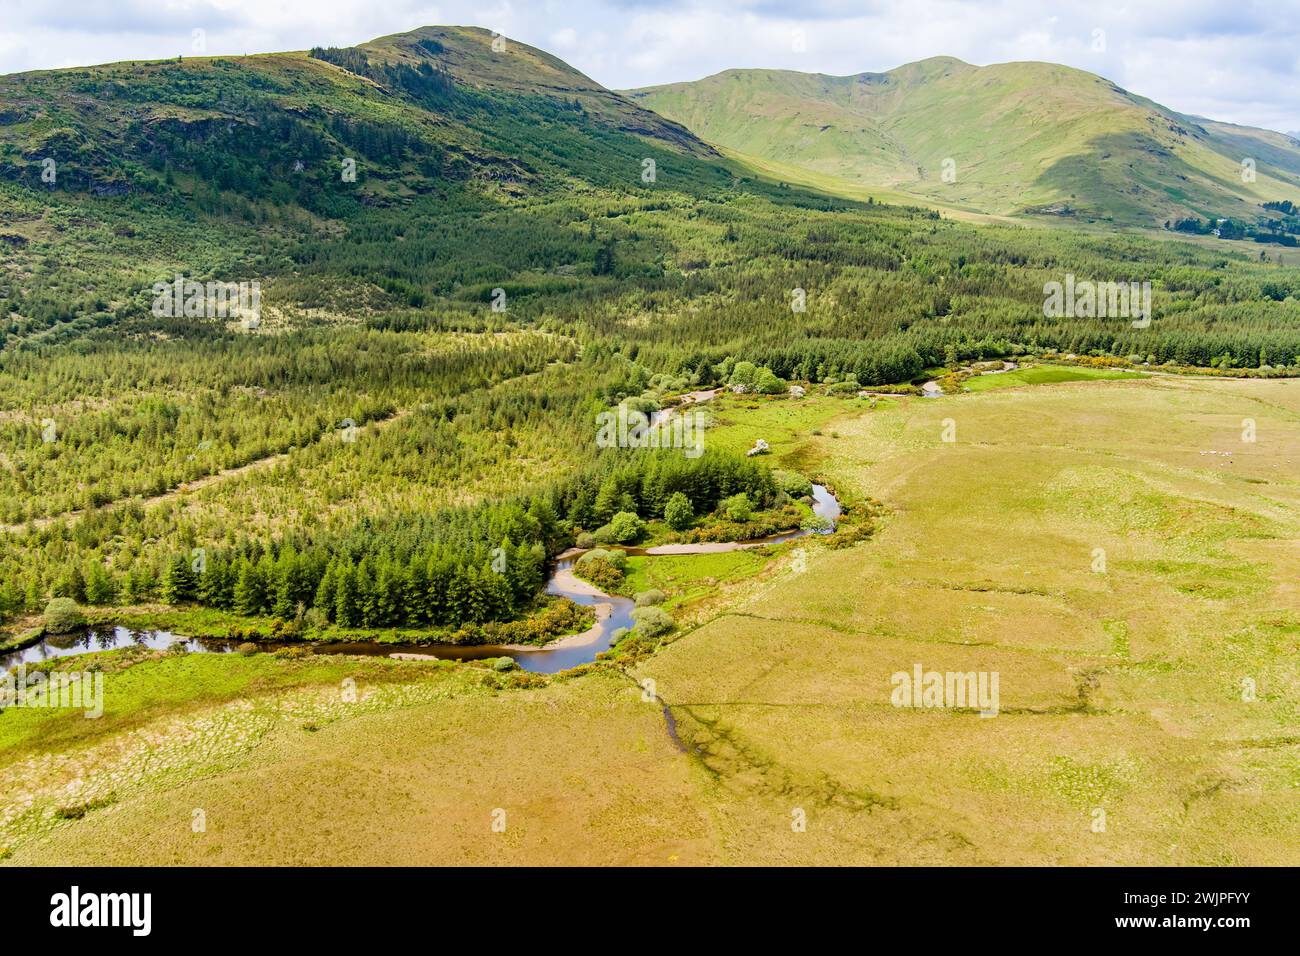 Aerial view of Joyce's river winding down below in Connemara region in Ireland. Scenic Irish countryside landscape with magnificent mountains on the h Stock Photo